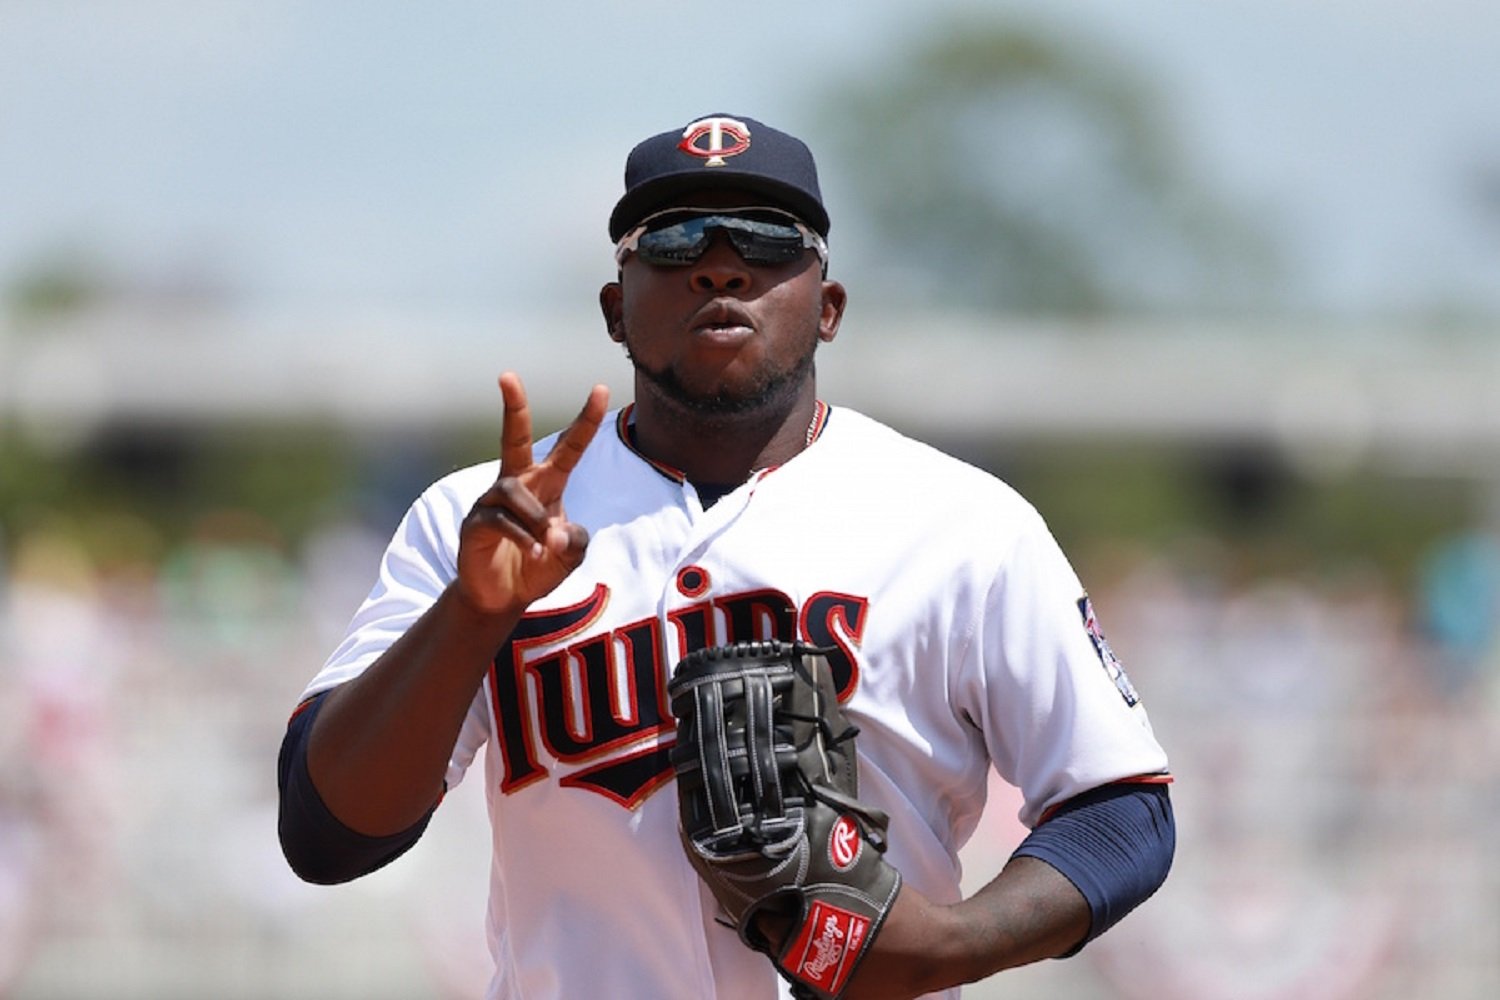 Jim Souhan: Miguel Sano's contract is big — to match his personality